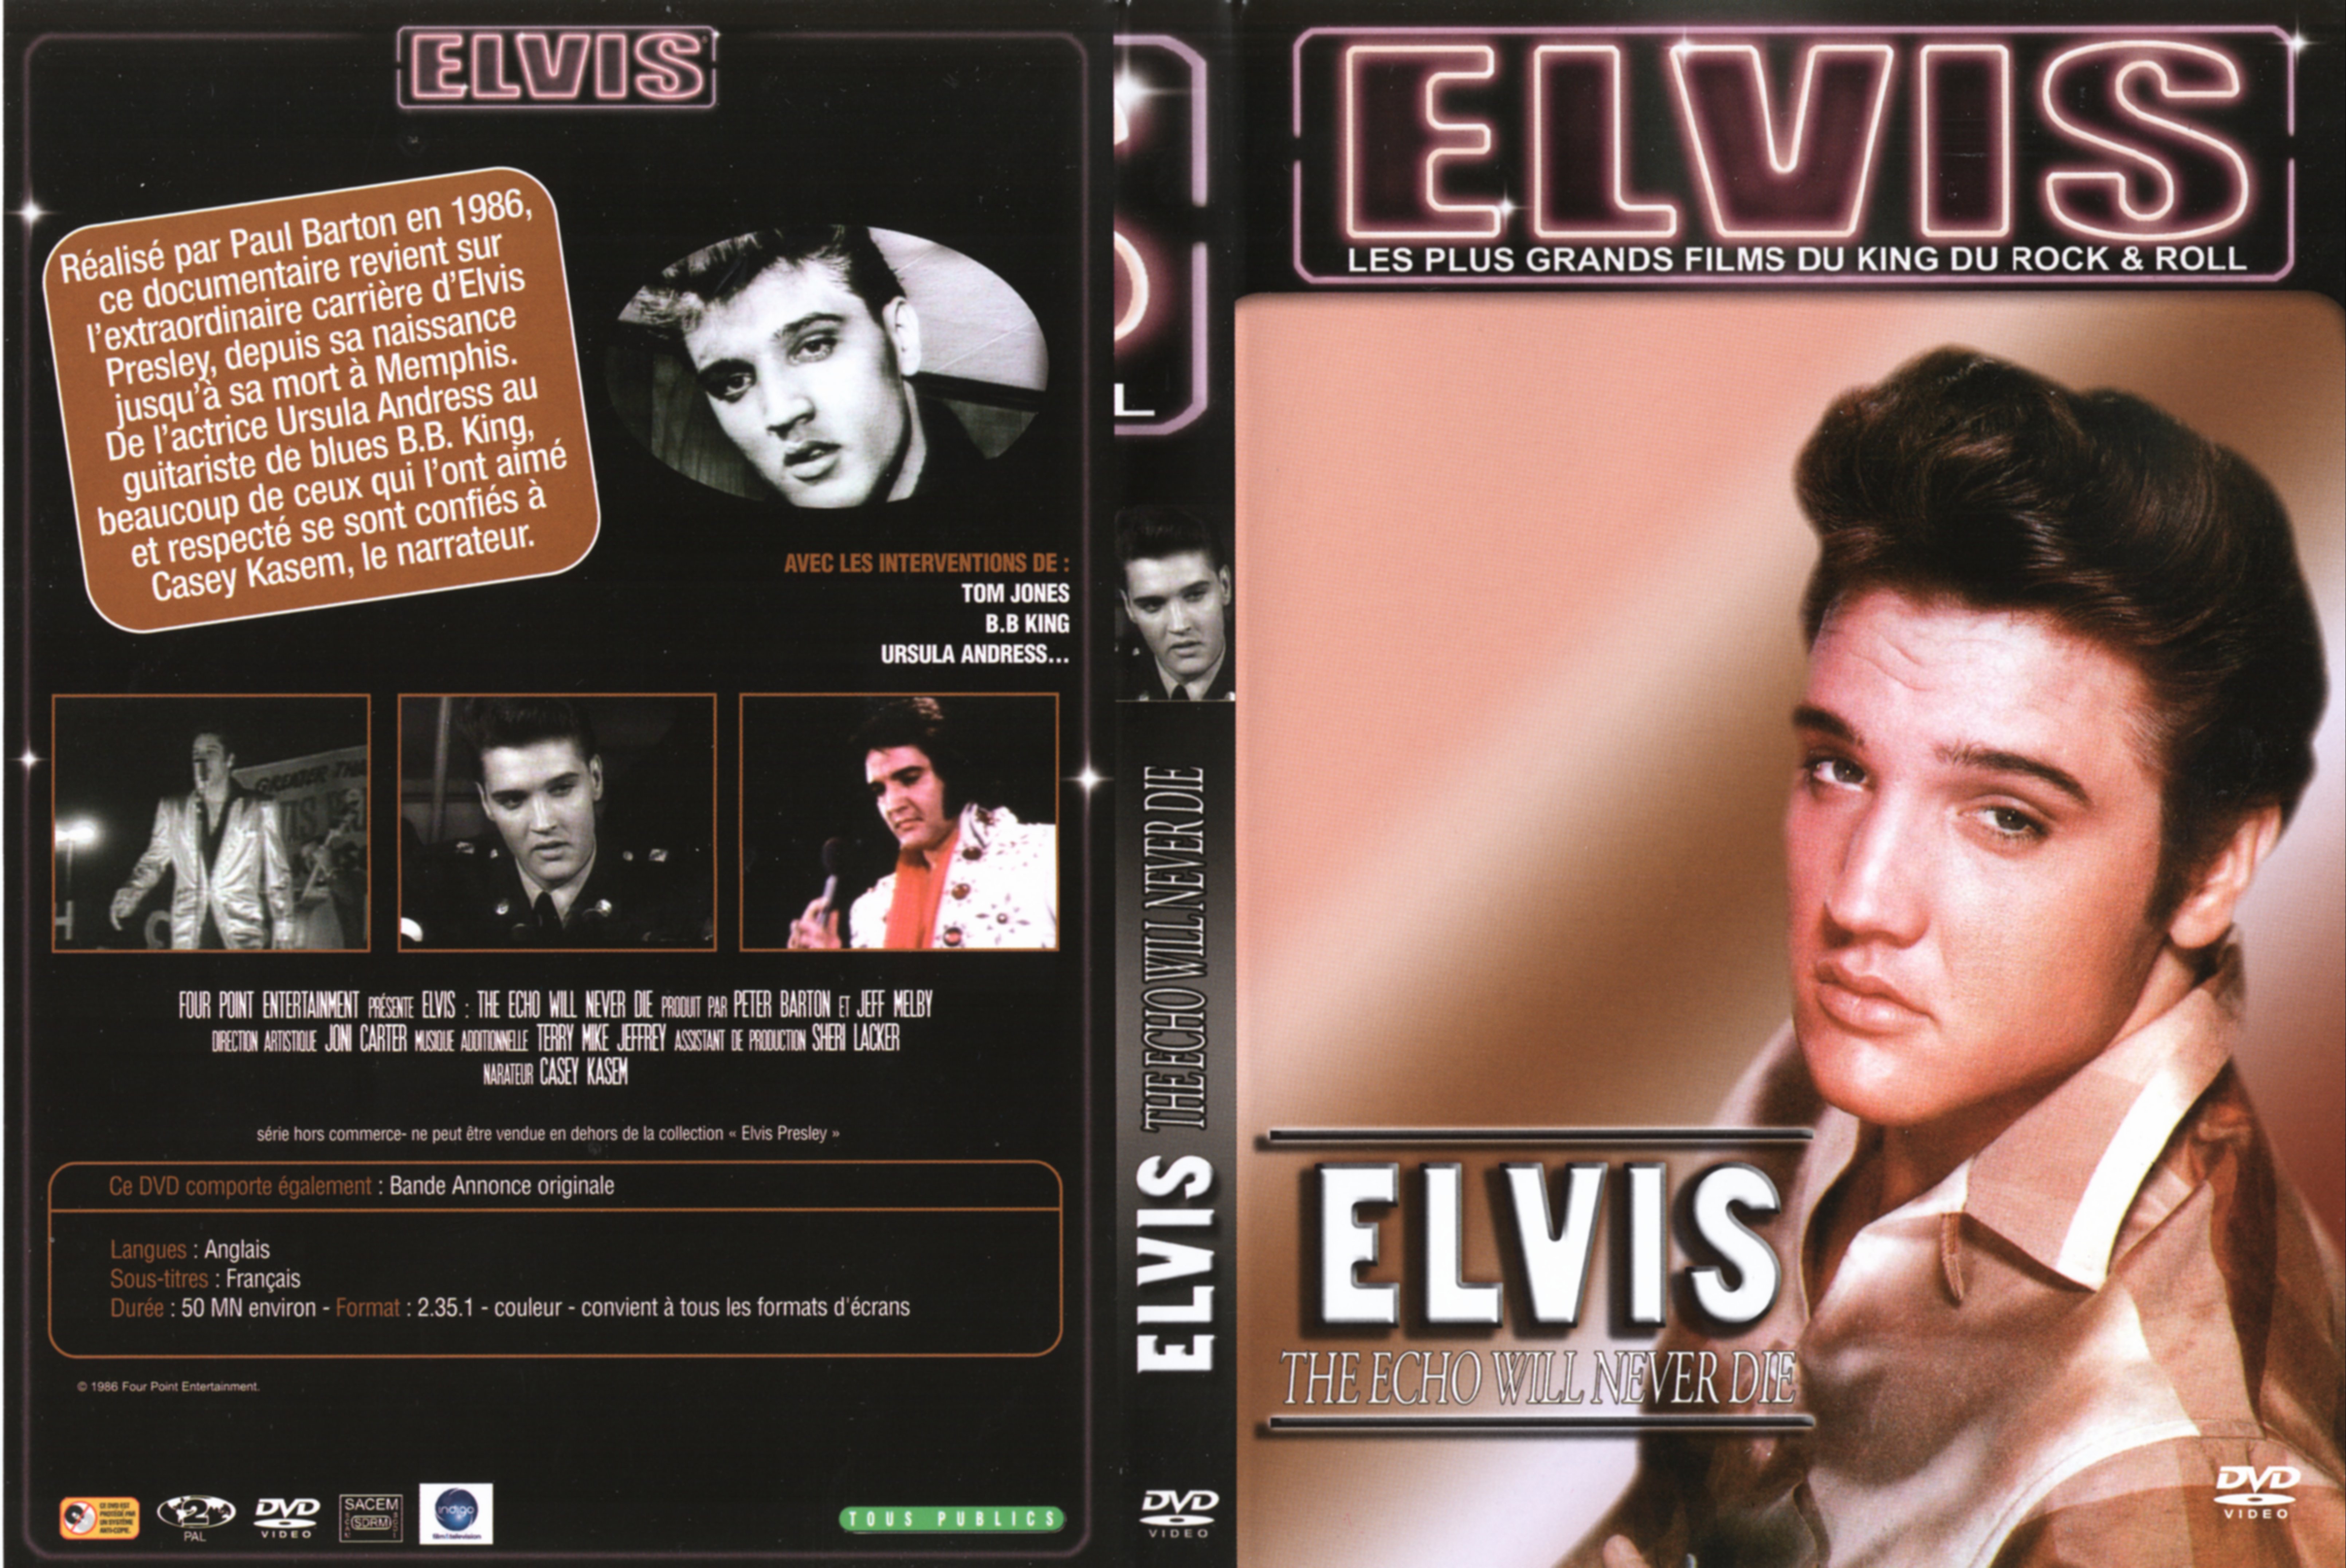 Jaquette DVD Elvis the echo wall never die